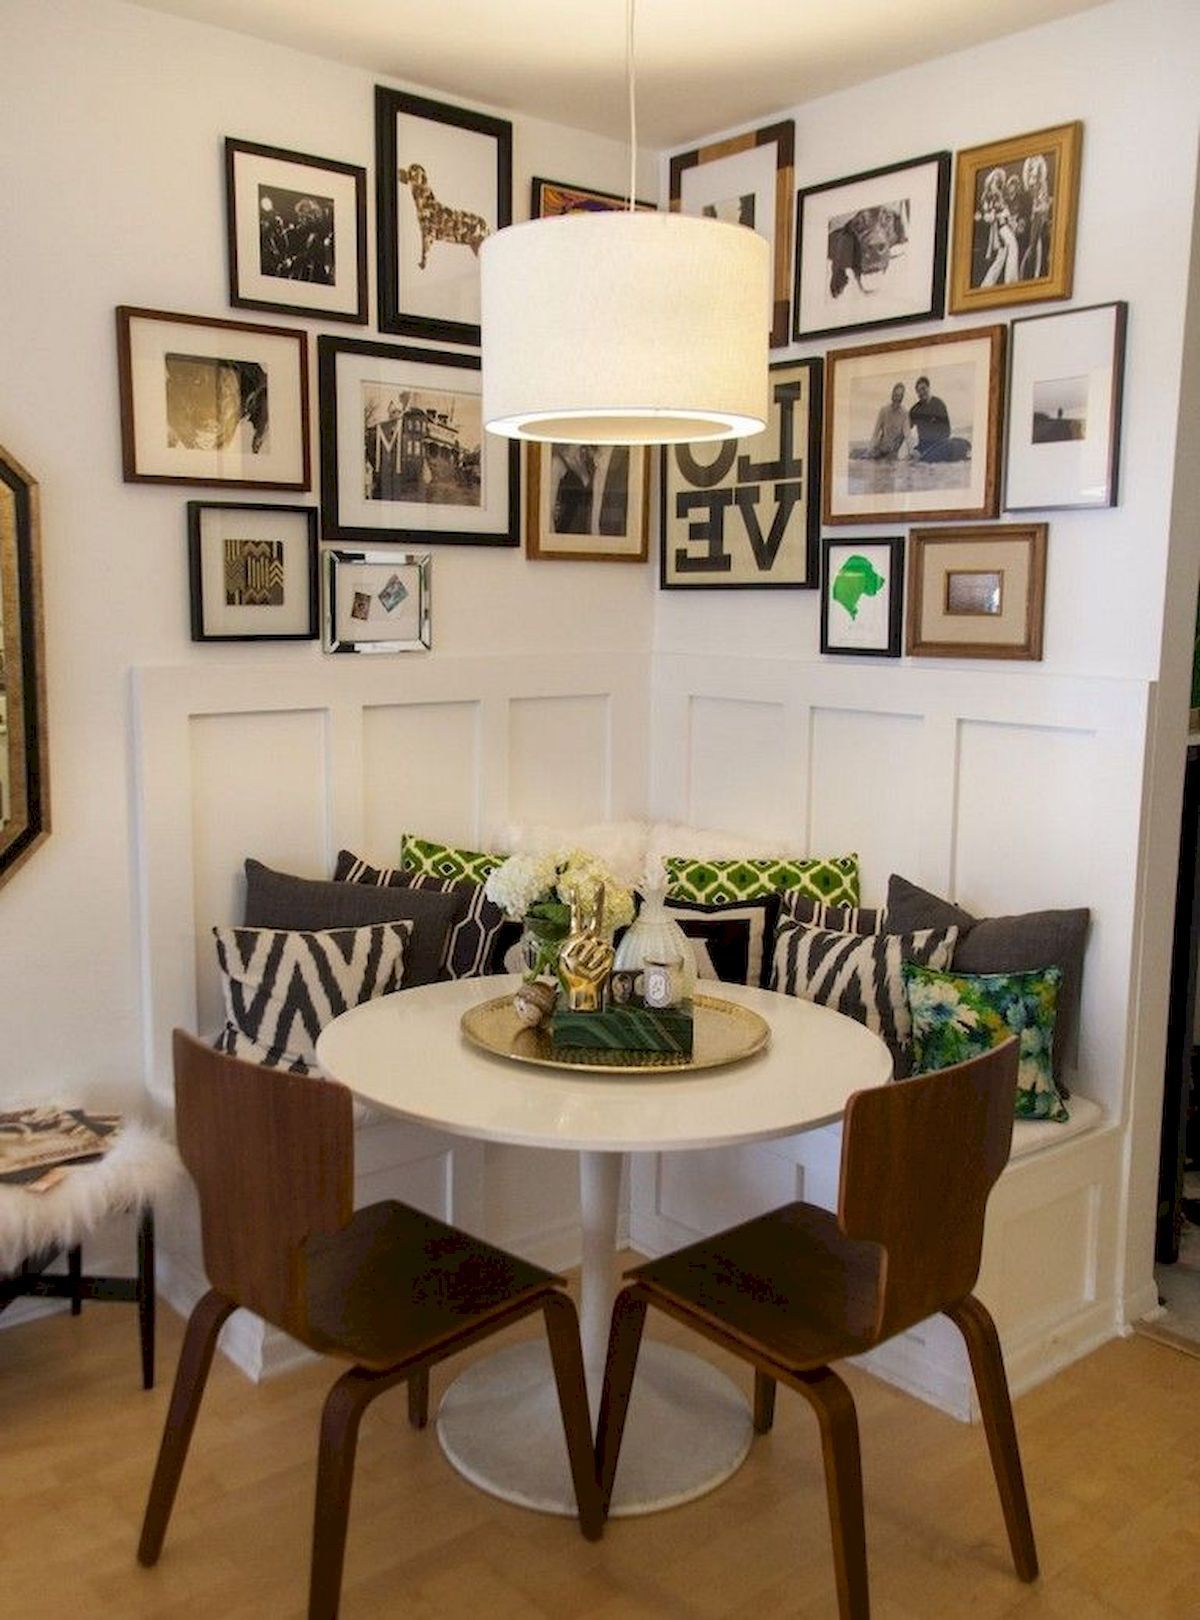 52 Beautiful Small Dining Room Ideas On A Budget -   14 dining room decor On A Budget ideas